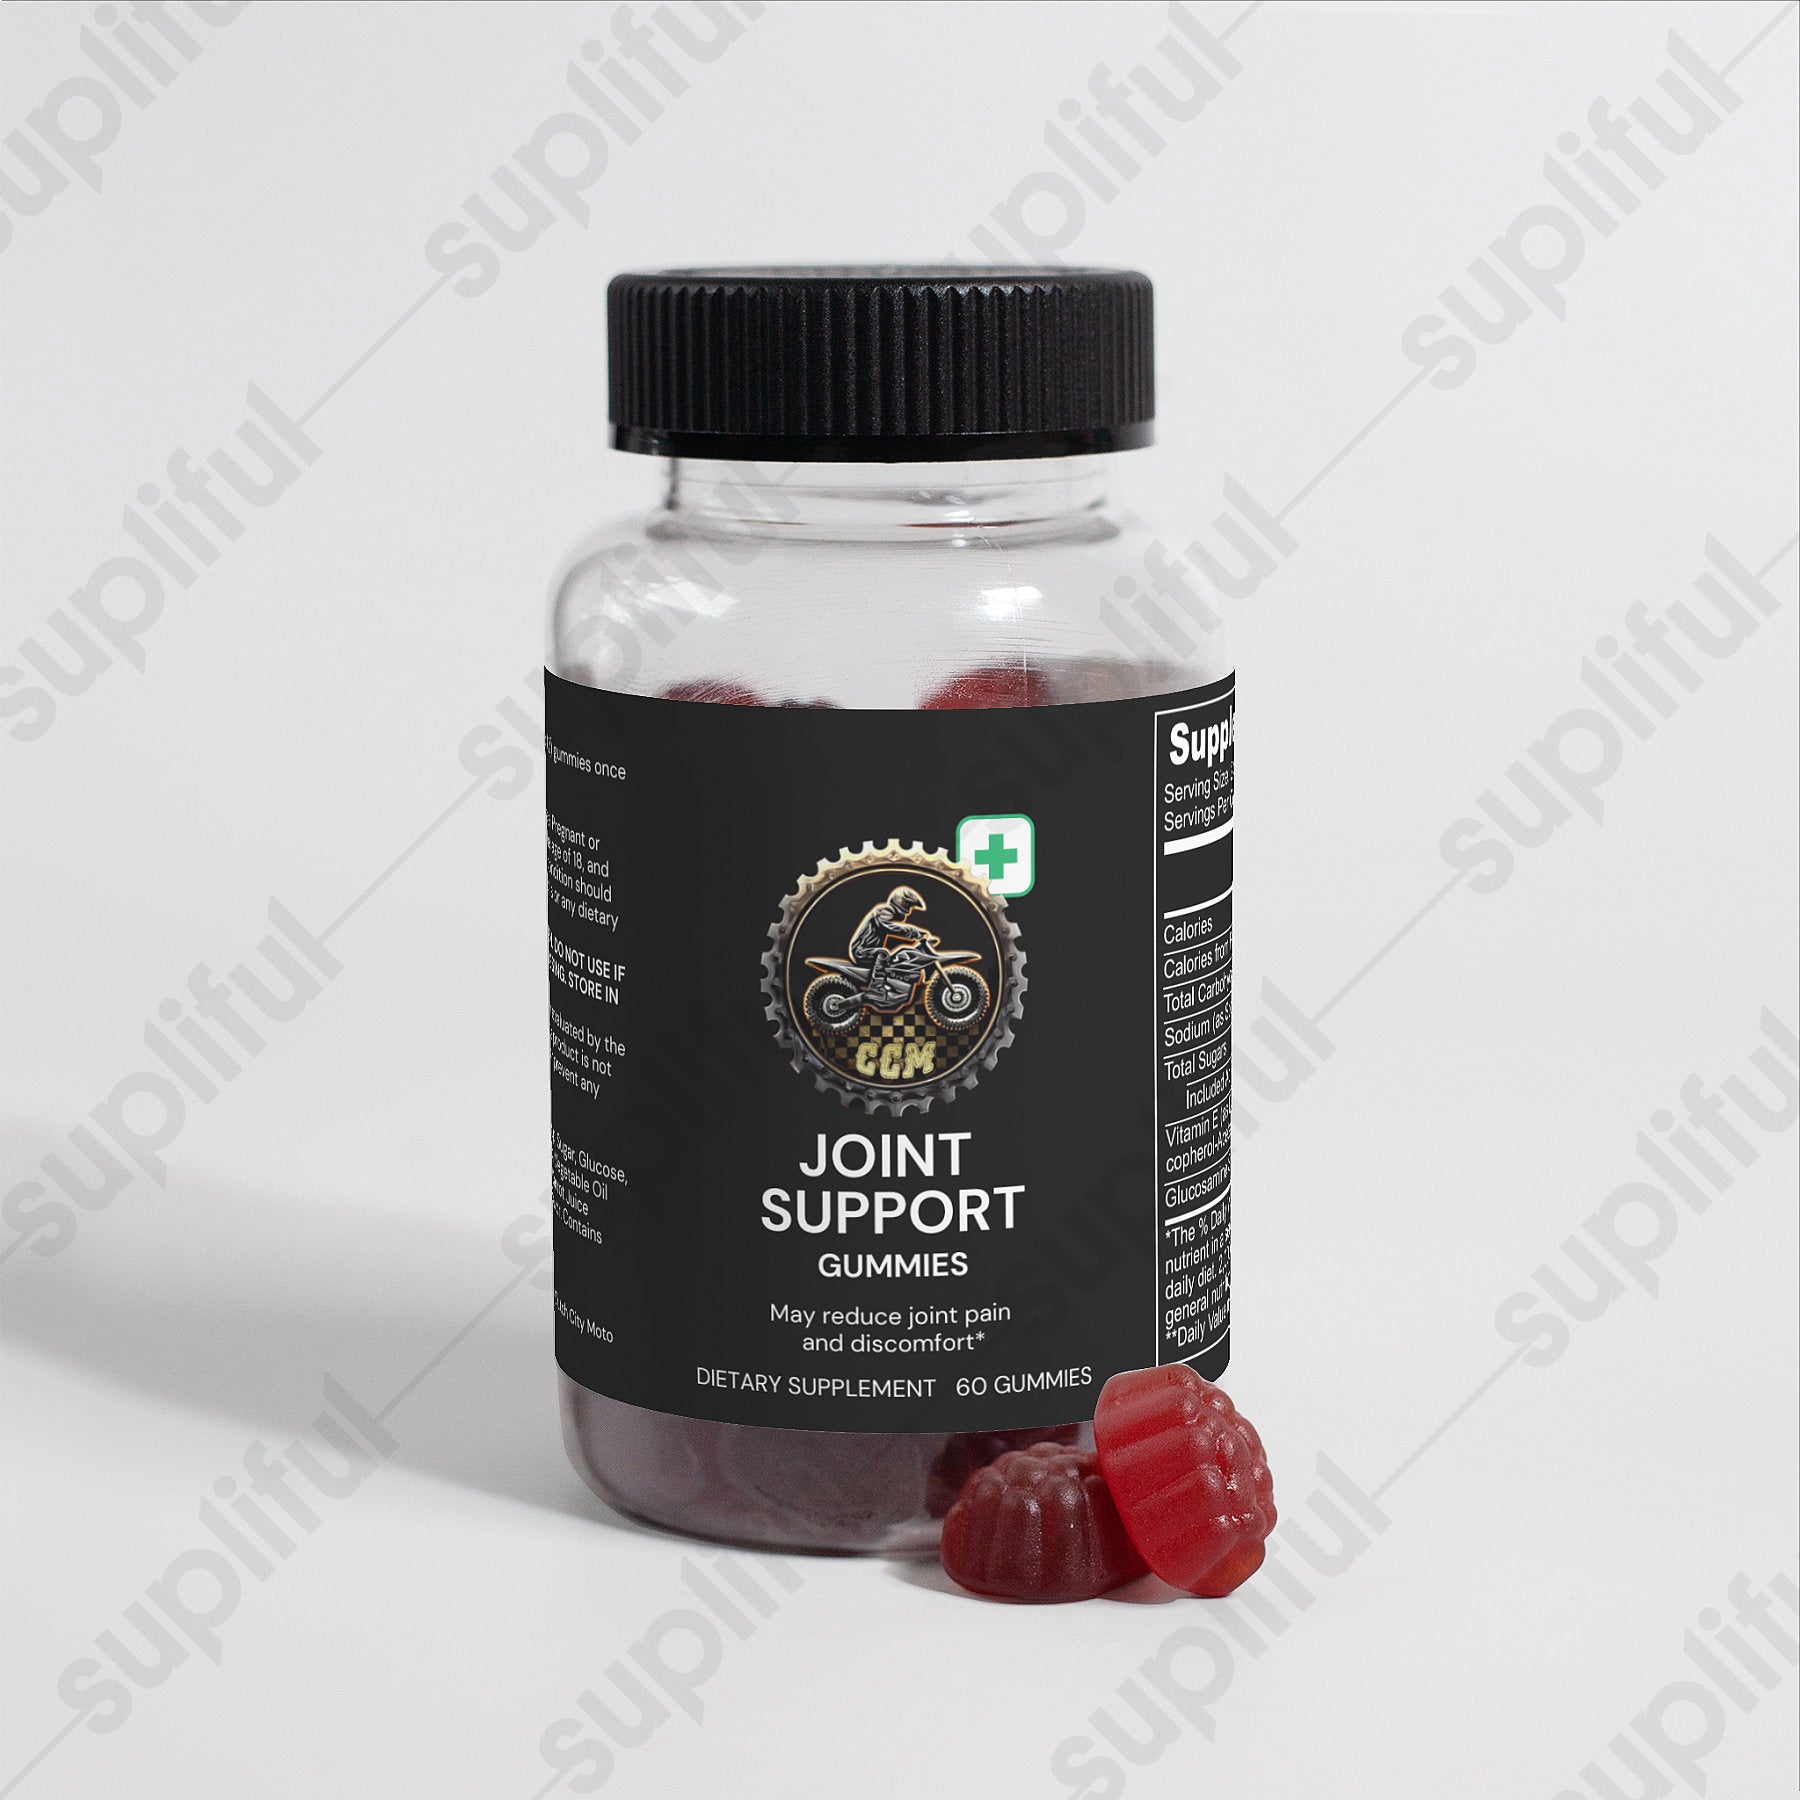 Premium Delicious Joint Support Gummies for Extreme Athletes (Adult) Introducing our Joint Support Gummies, specially designed for athletes in the world of motocross, BMX, MTB, and other extreme sports enthusiasts who put their bodies through the ultimate tests.